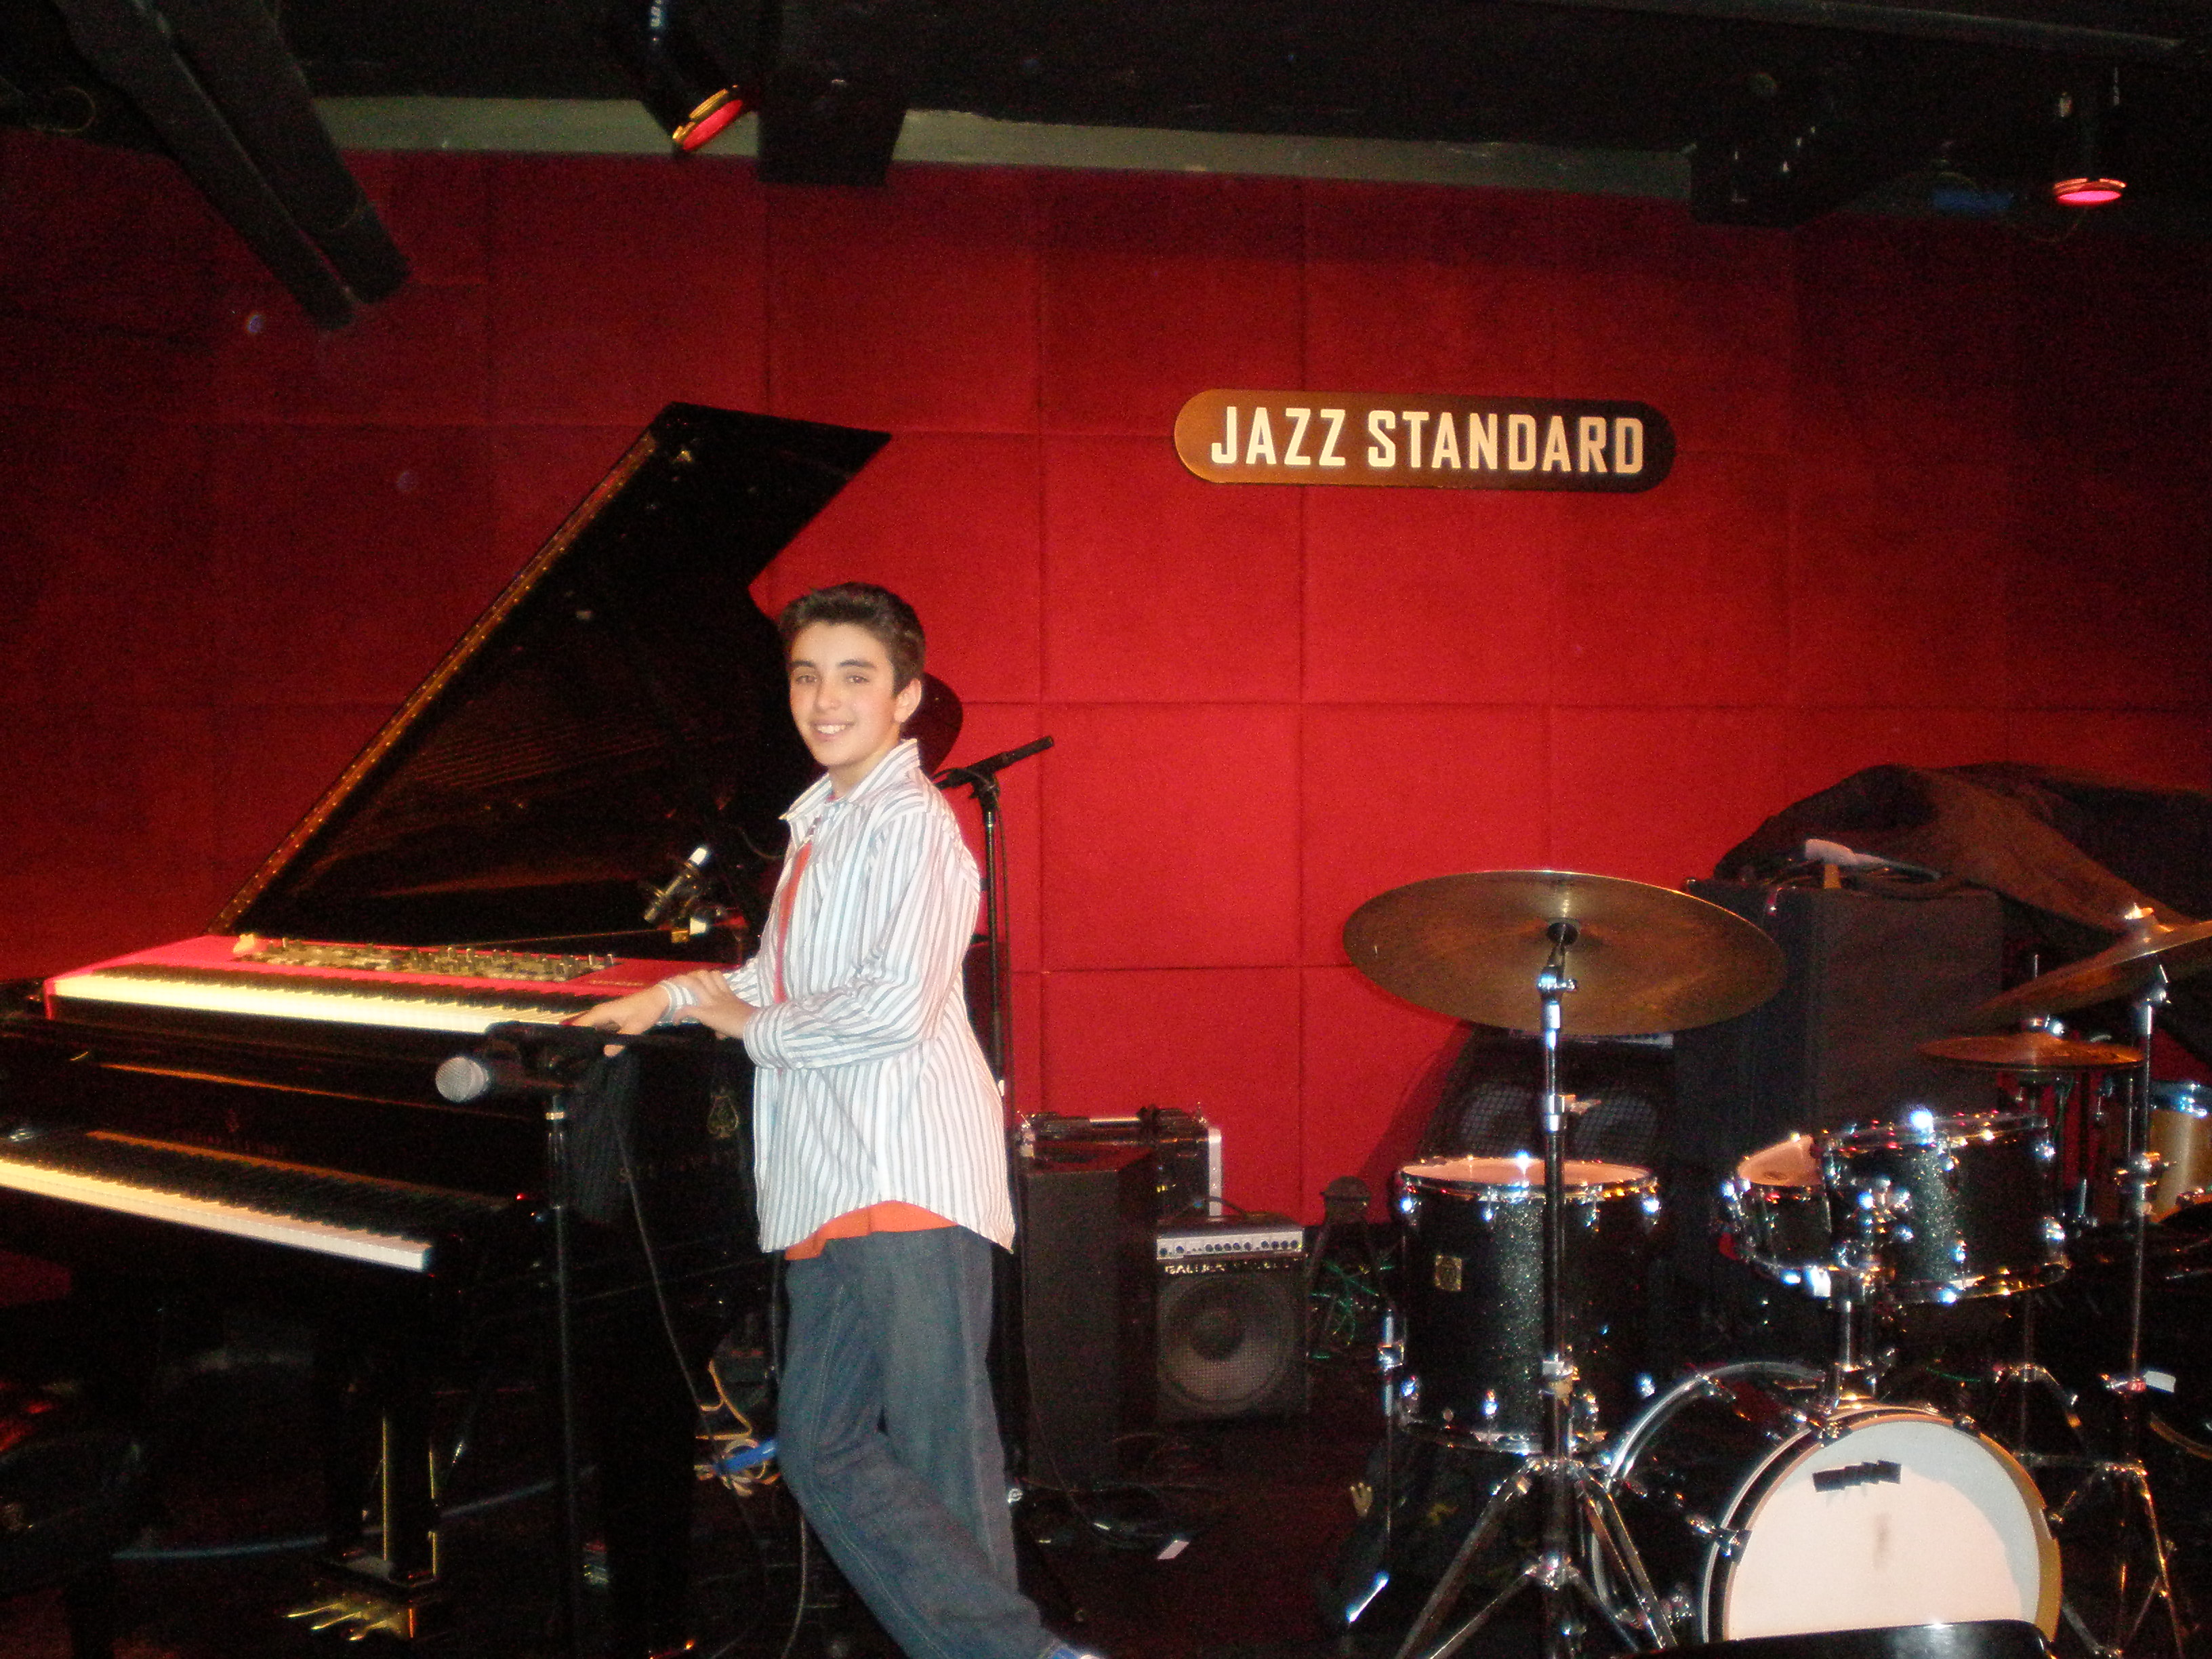 Christopher performs once a month as a featured Pianist w/ the Jazz Standard Youth Orchestra in NYC at the Jazz Standard.